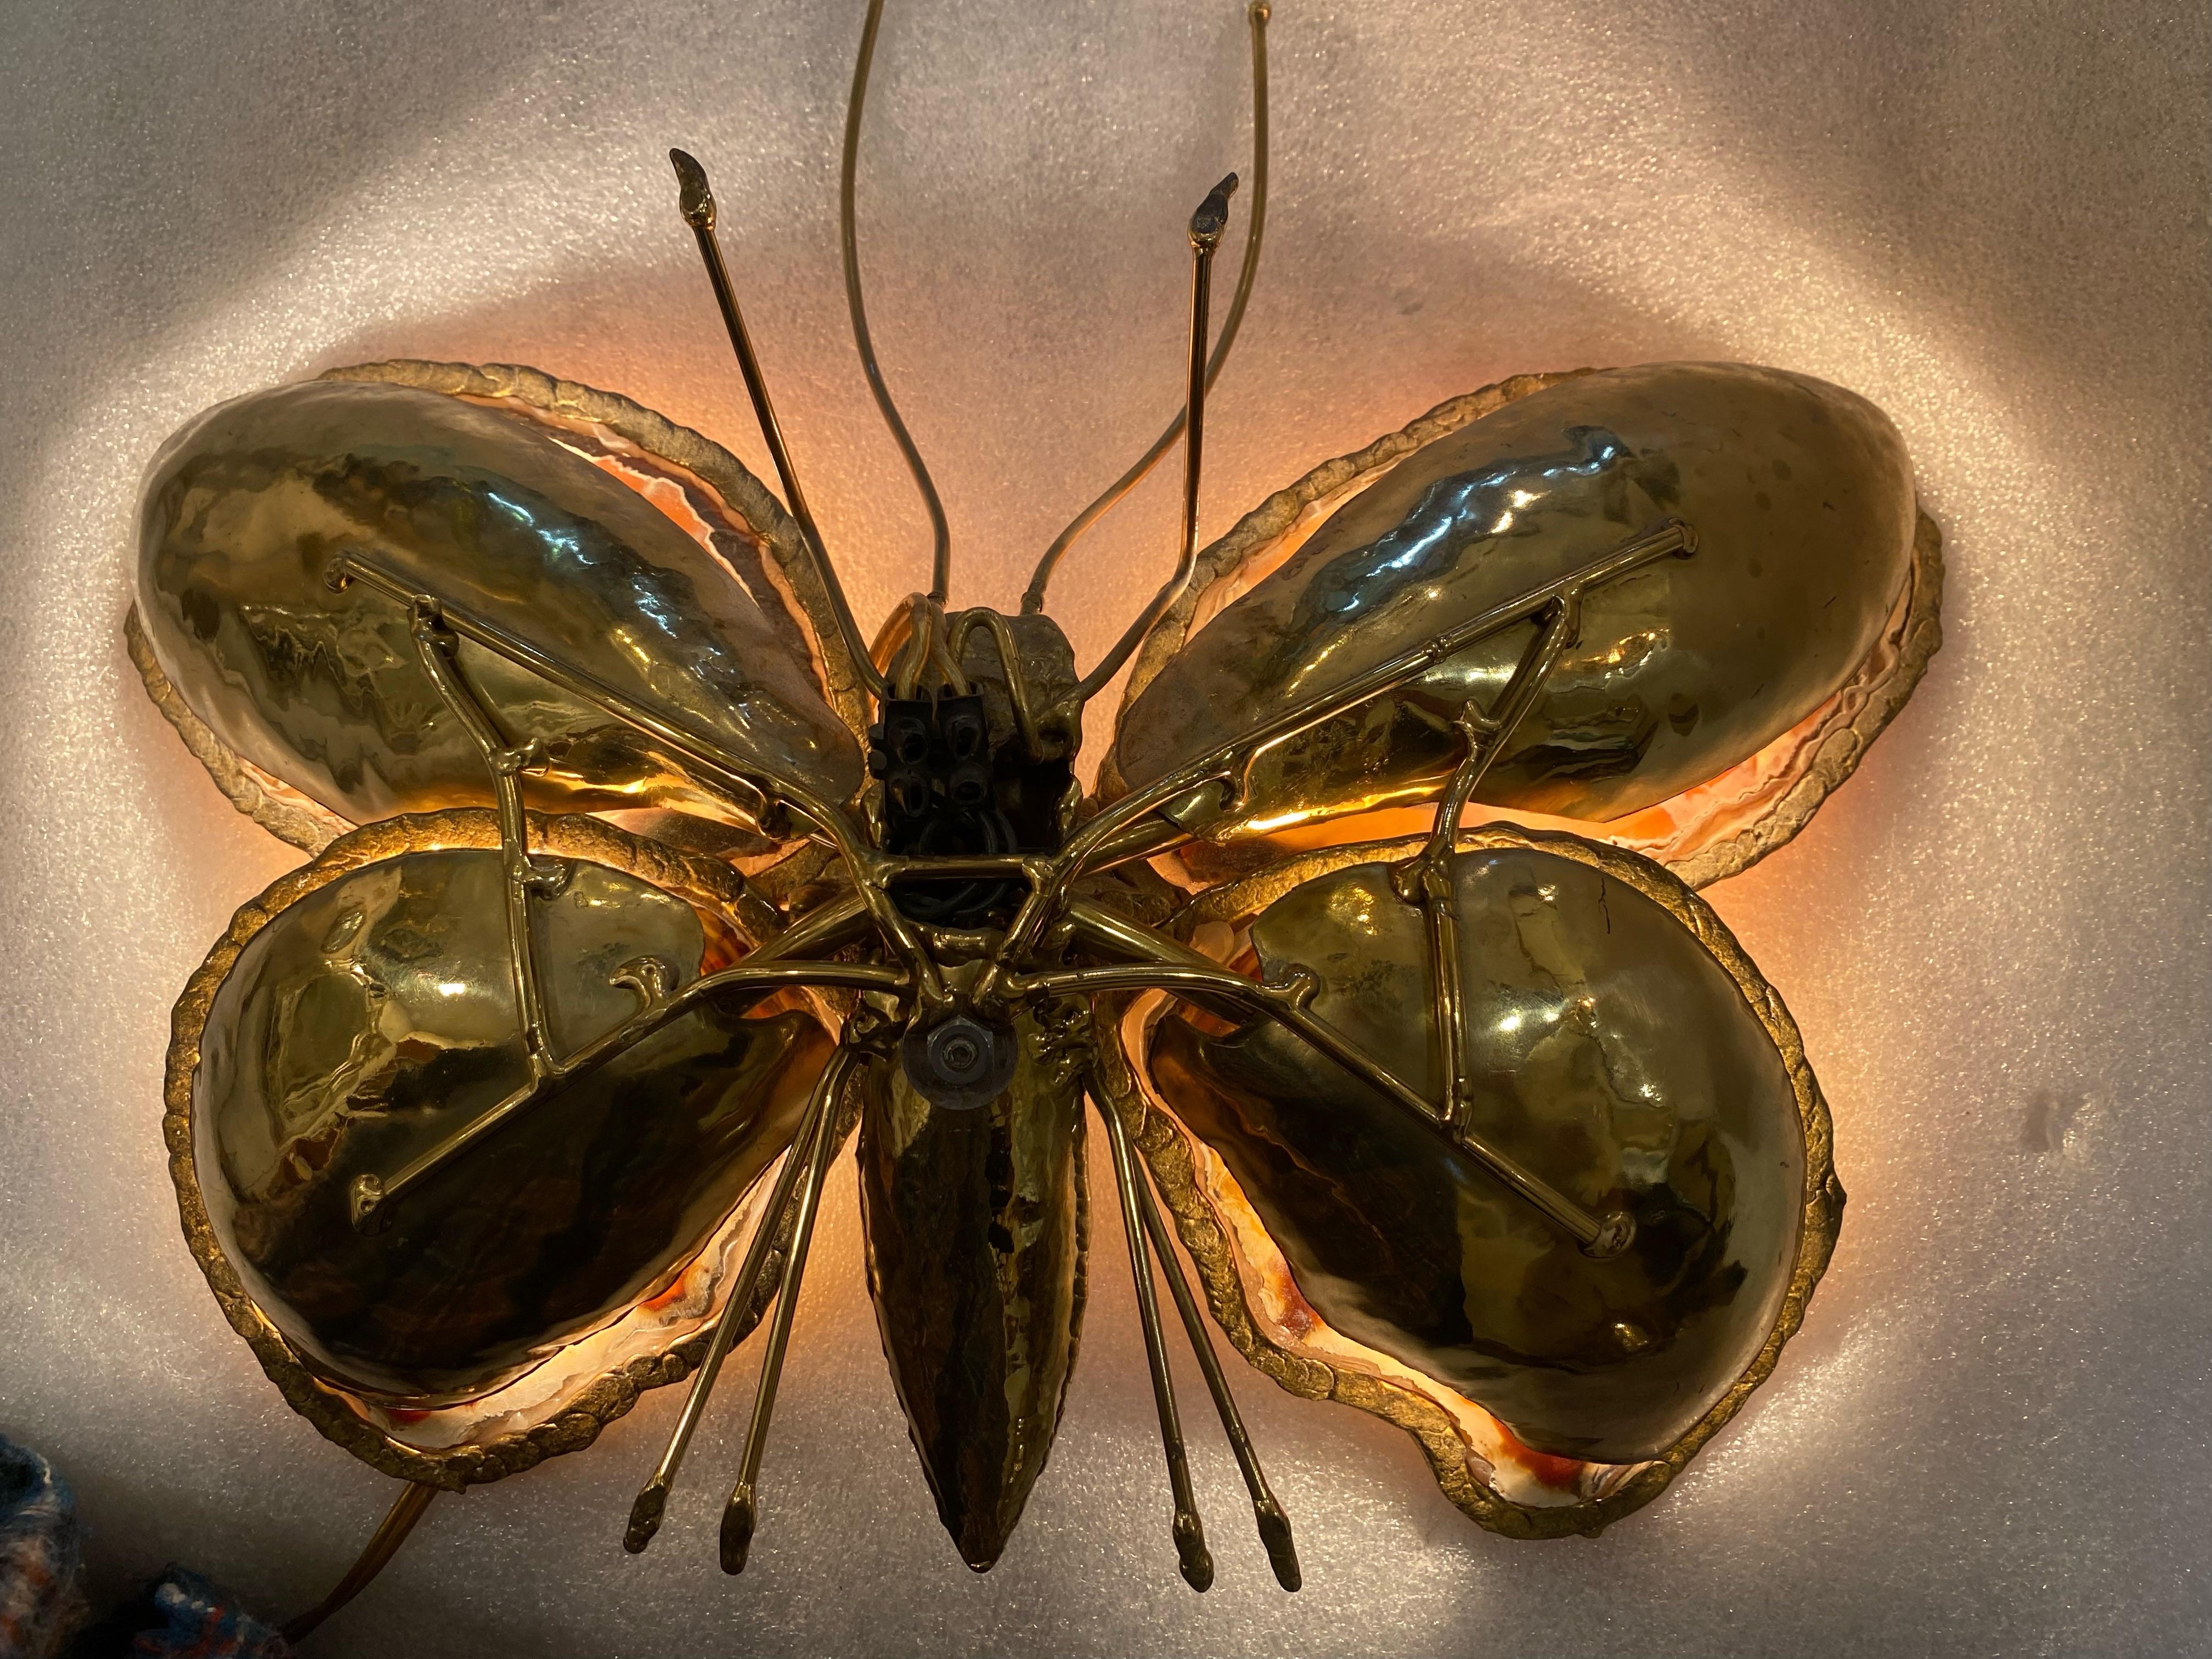 Polished 1970’ Couple of Butterfly Sconces in Bronze or Brass, Duval Brasseur or I.Faure